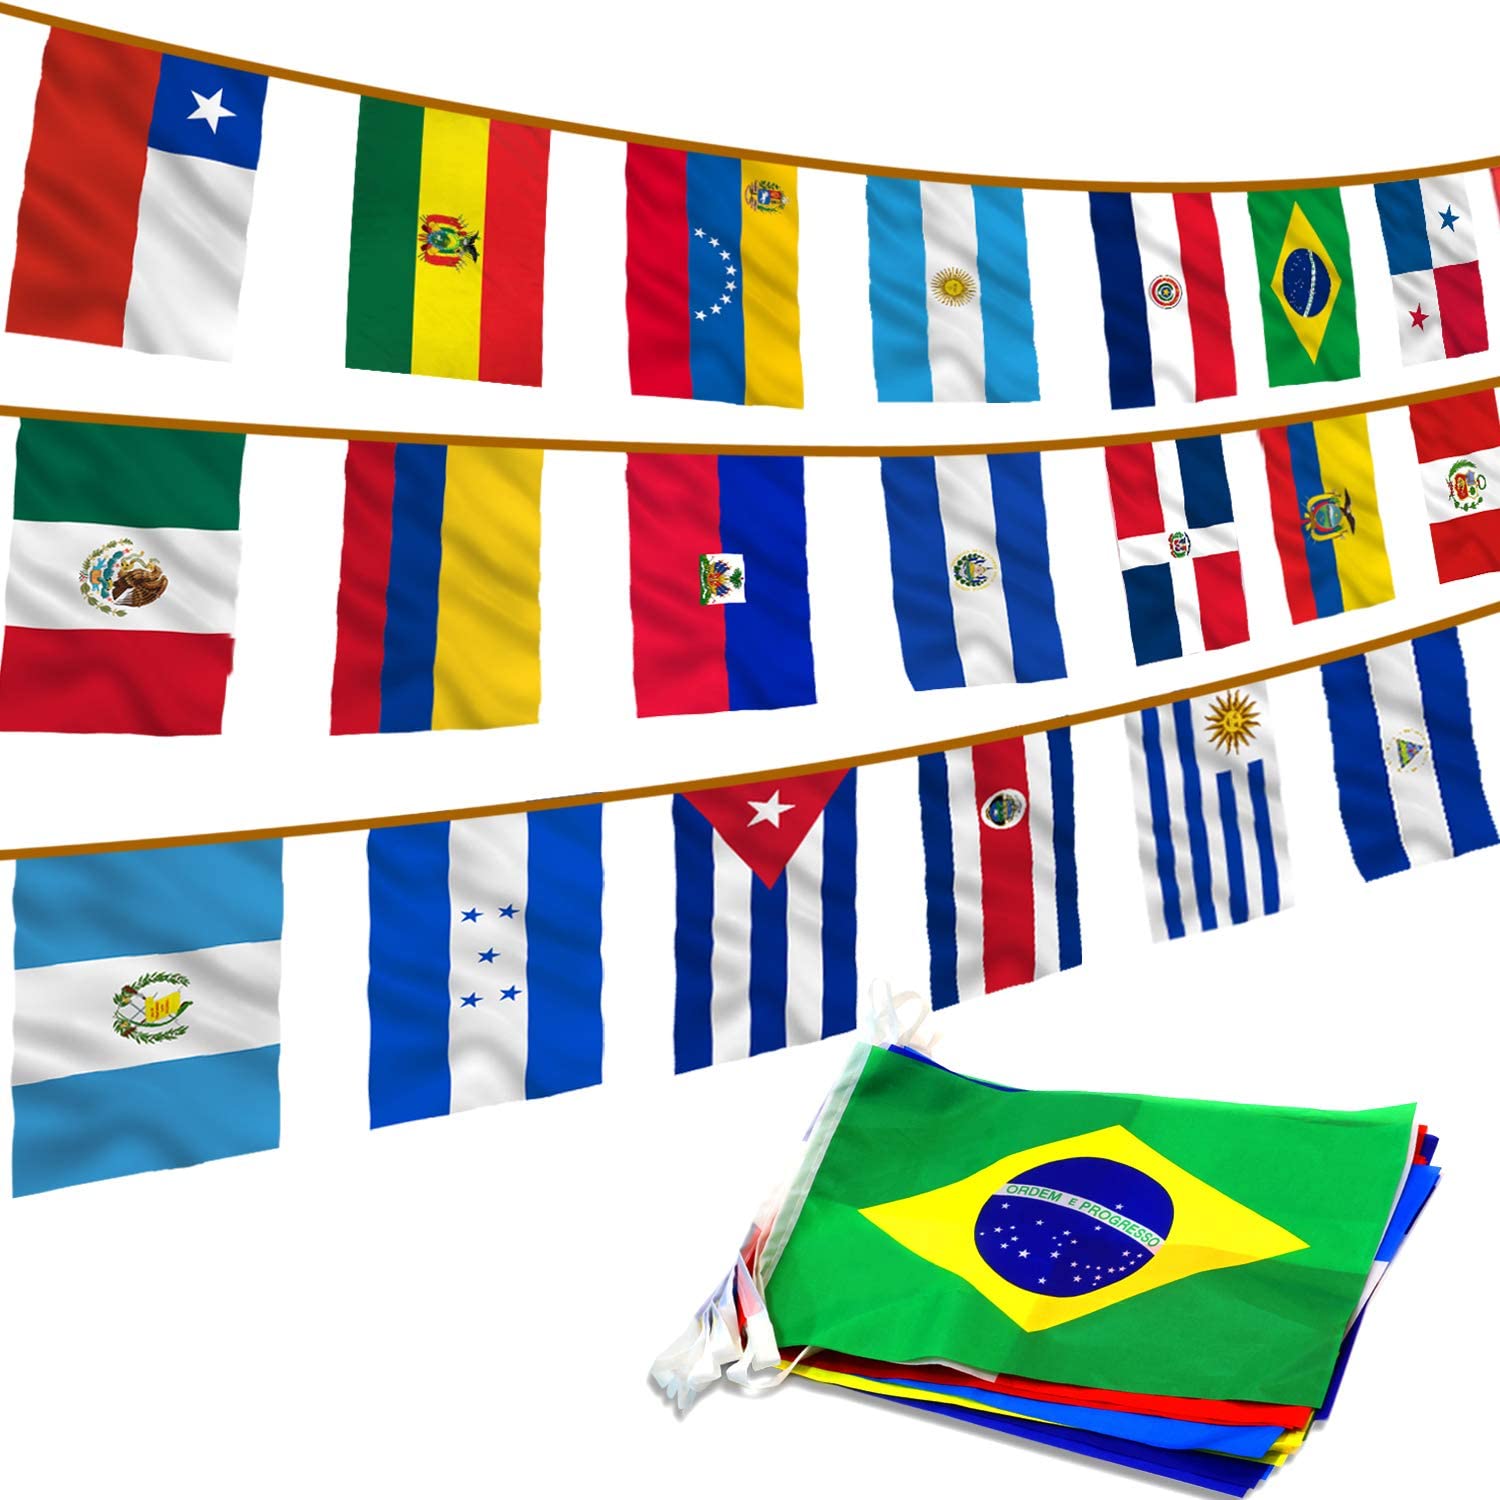 Anley Latin America 20 Countries String Flags – Assorted Latino Flag Banners for International Events Conference Party Decoratio